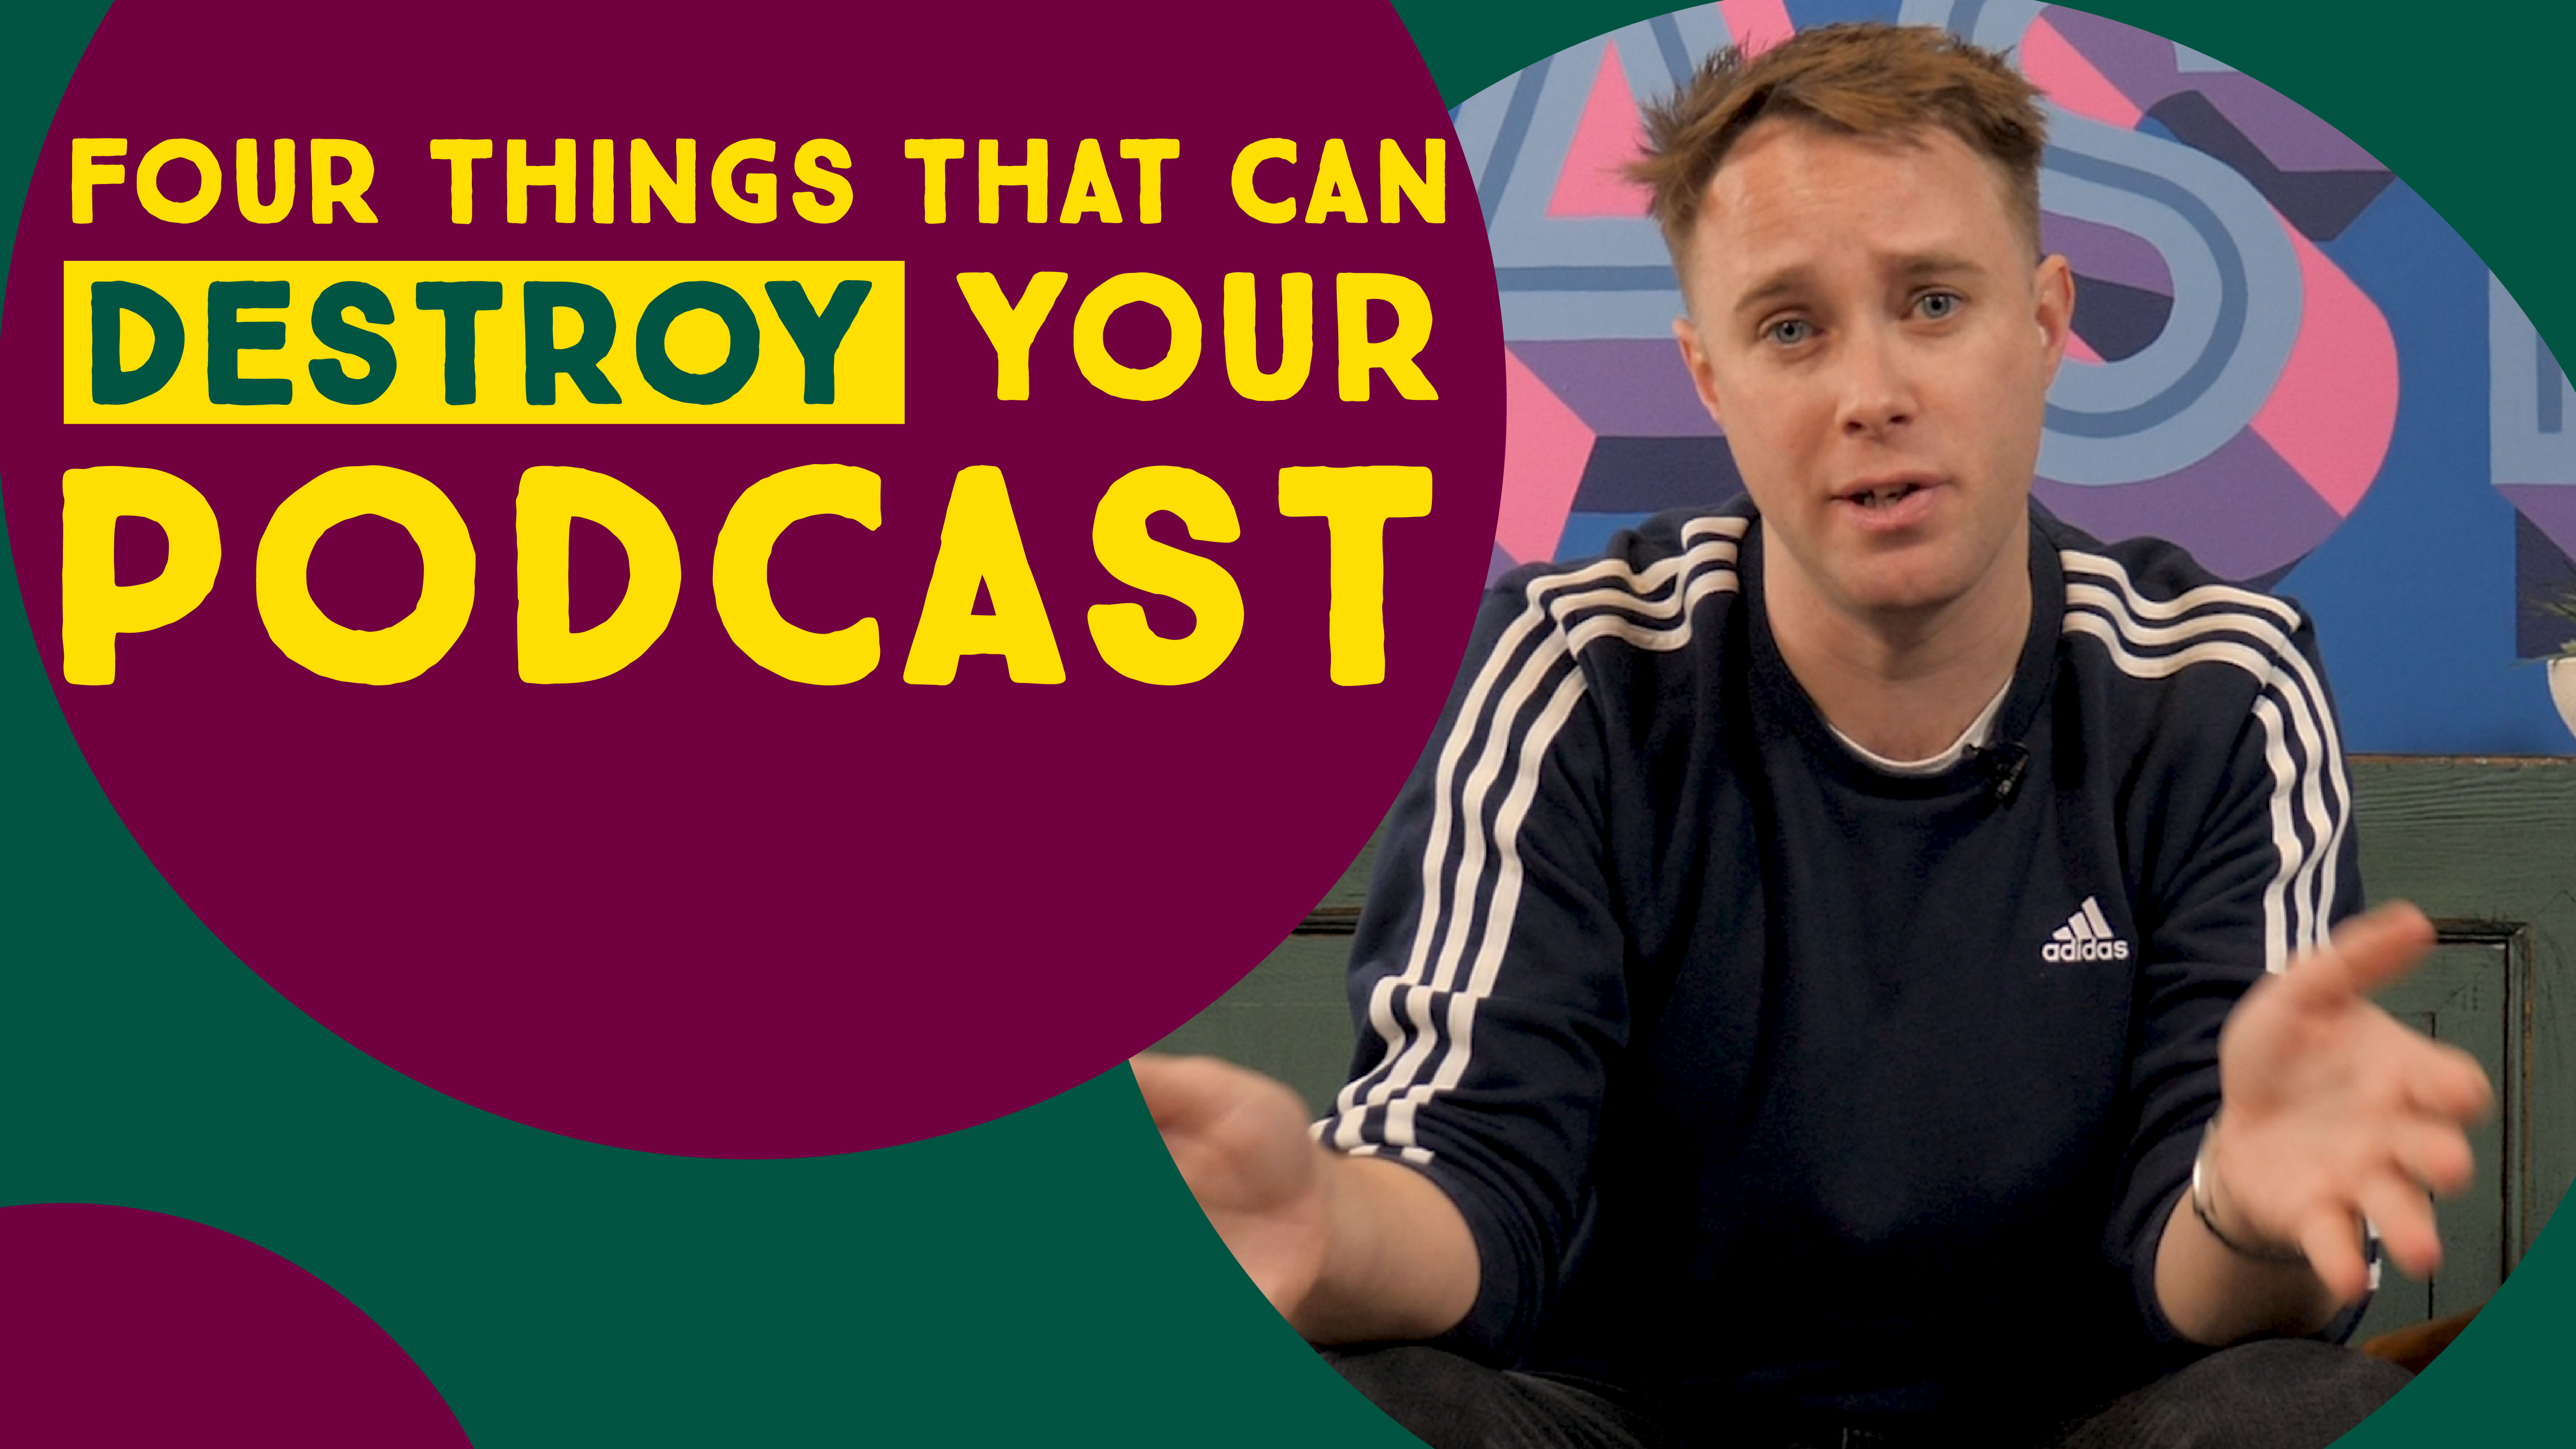 Four Things that can Destroy your Podcast